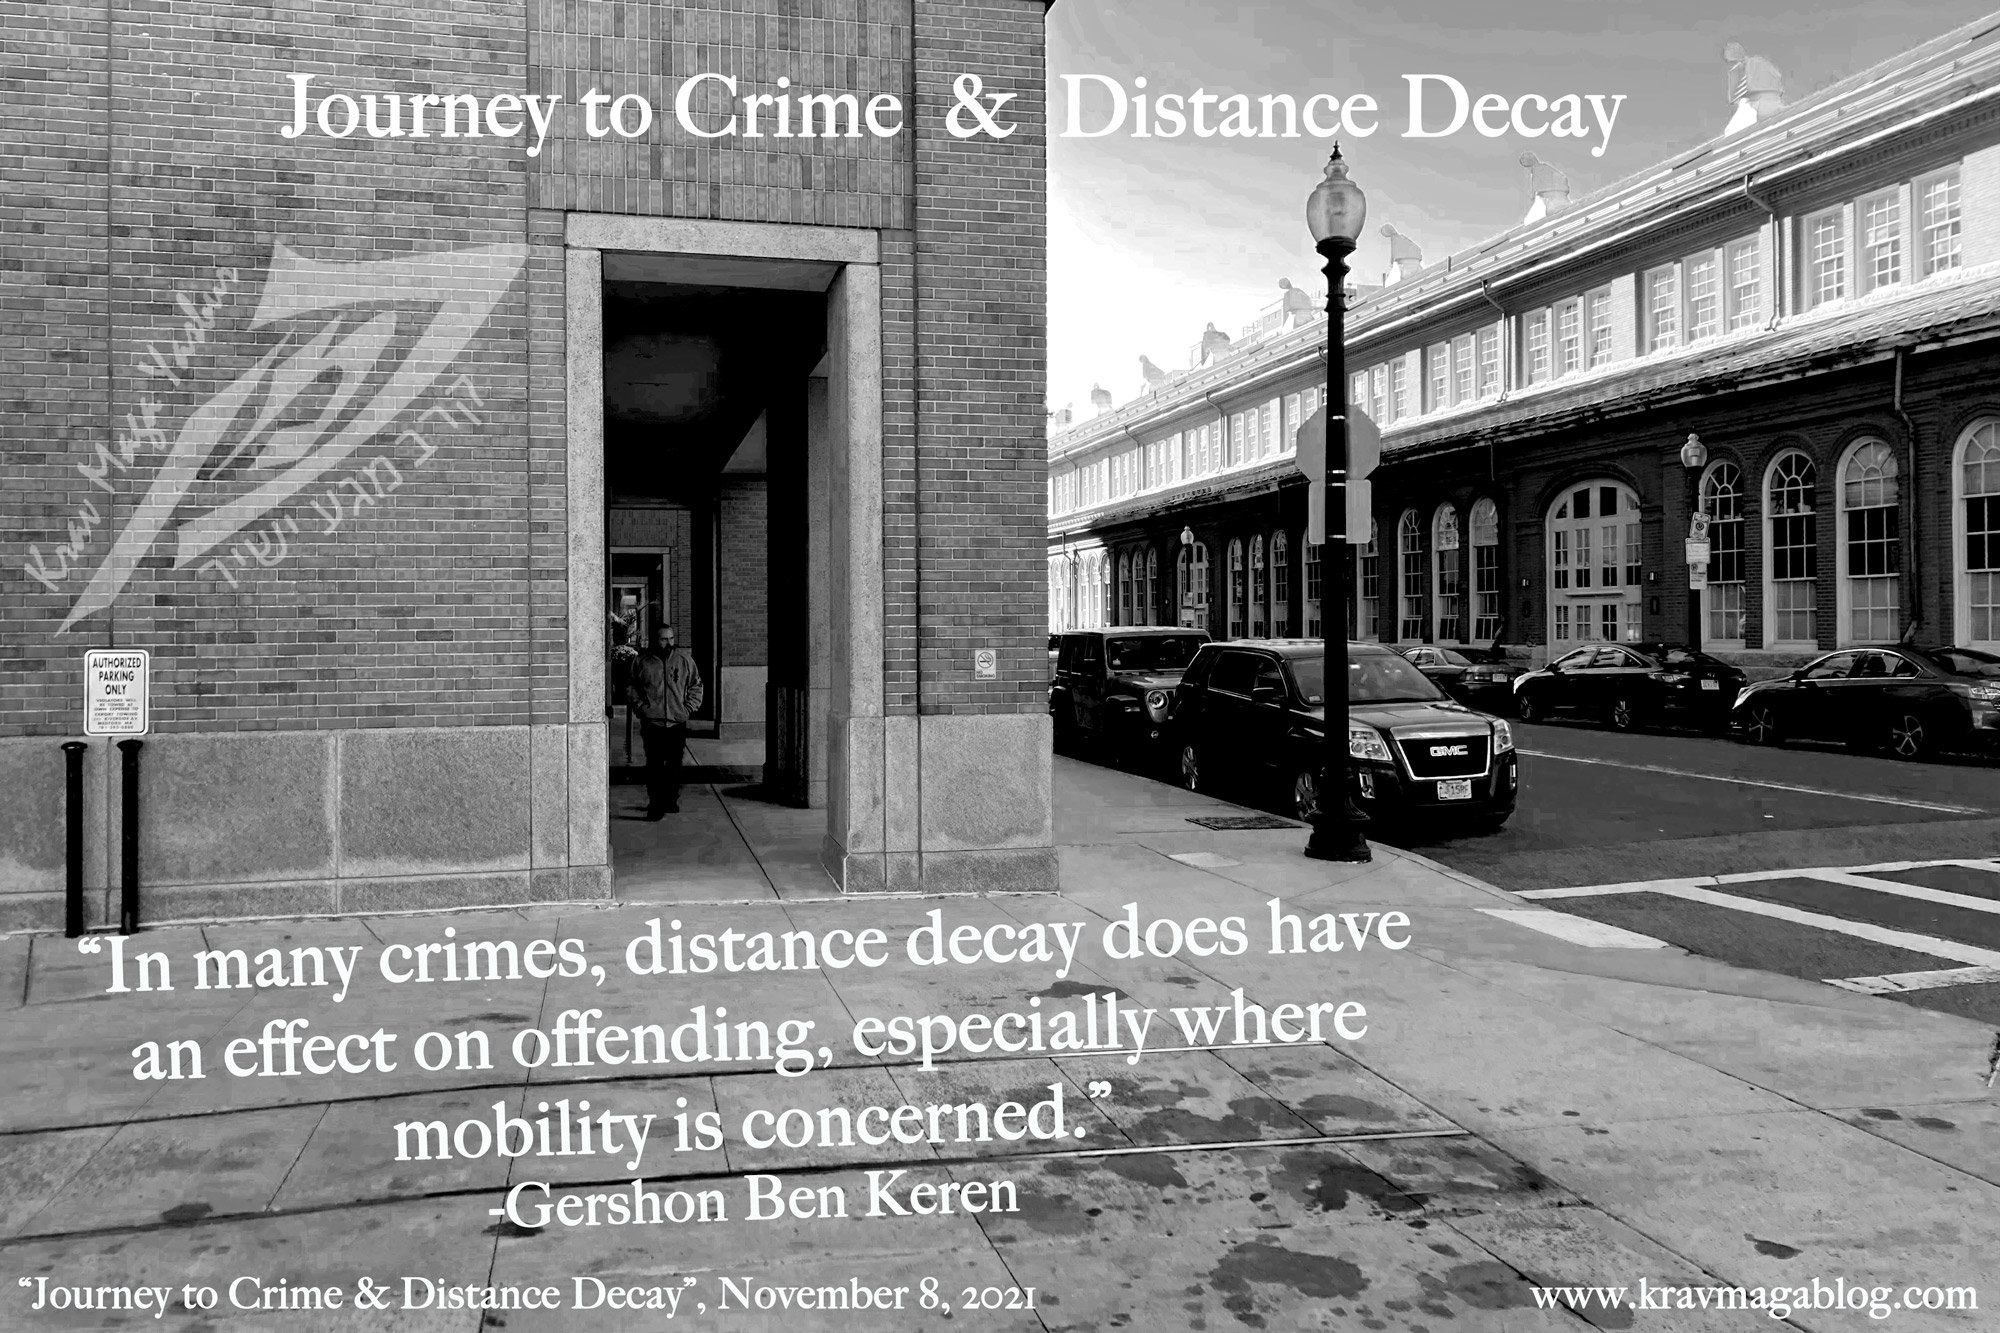 The Journey to Crime & Distance Decay